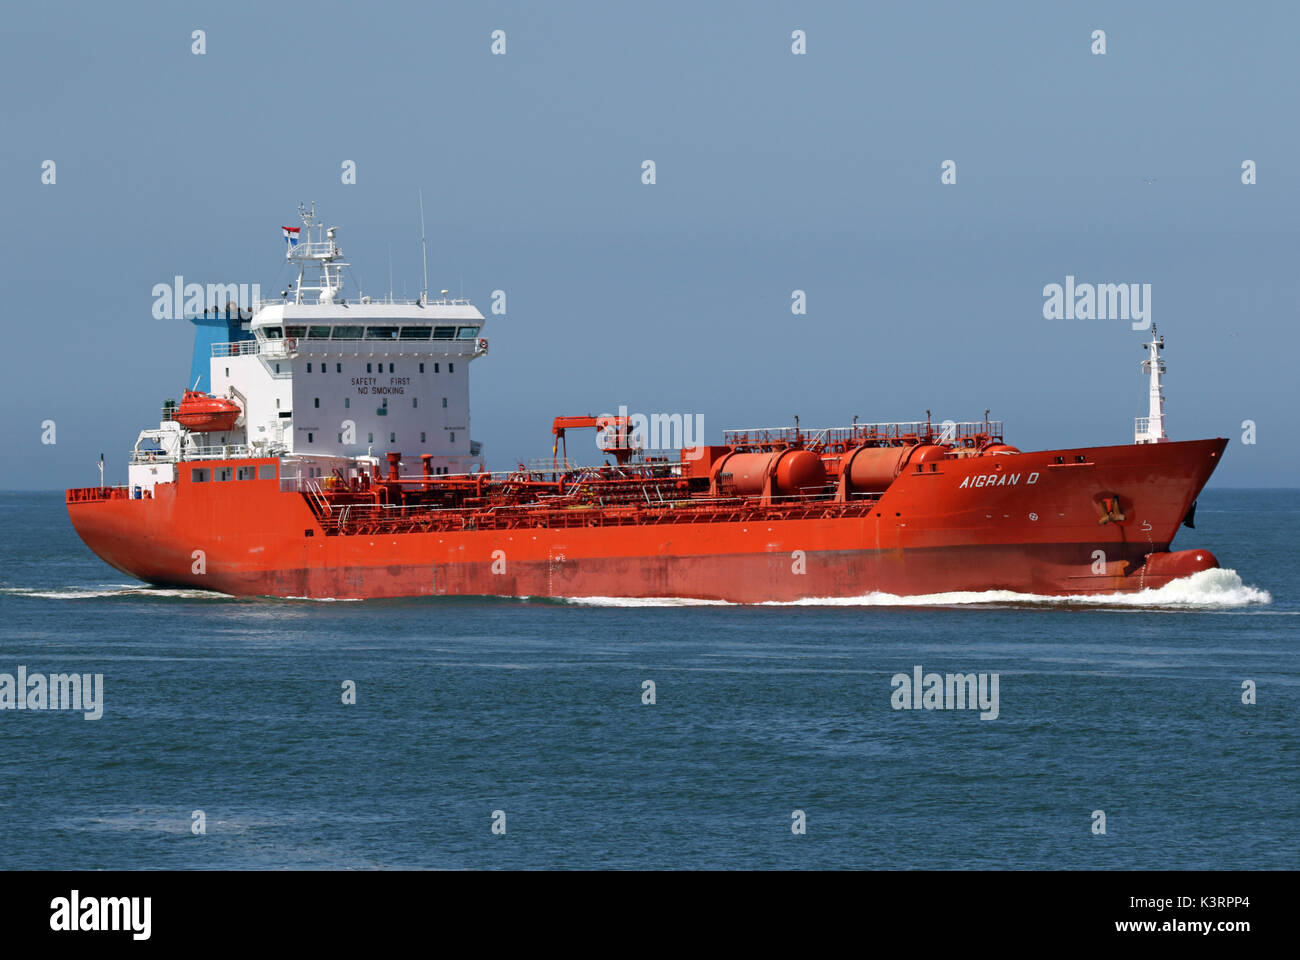 The tanker Aigran D enters the port of Rotterdam. Stock Photo